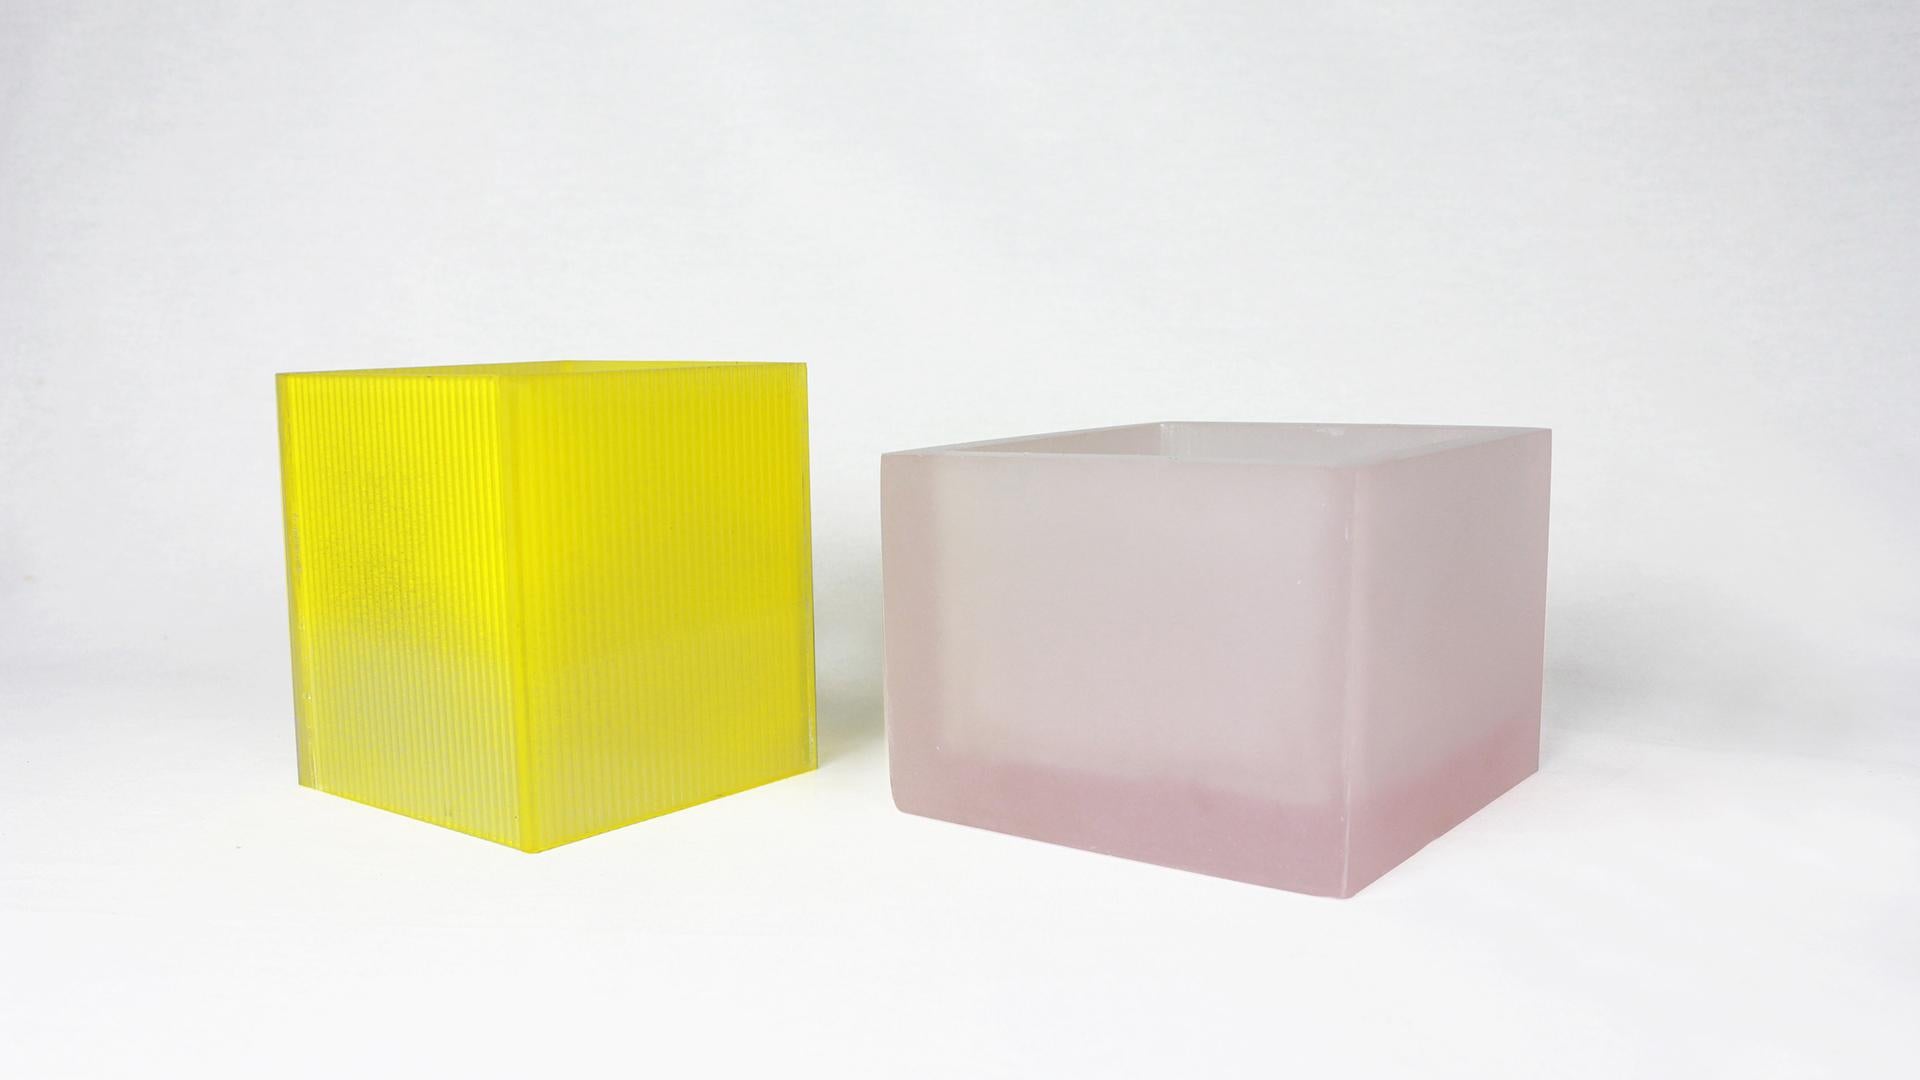 Hand-Crafted Contemporary Design Vase in Resin Glass Handcrafted Yellow and Pink Color For Sale